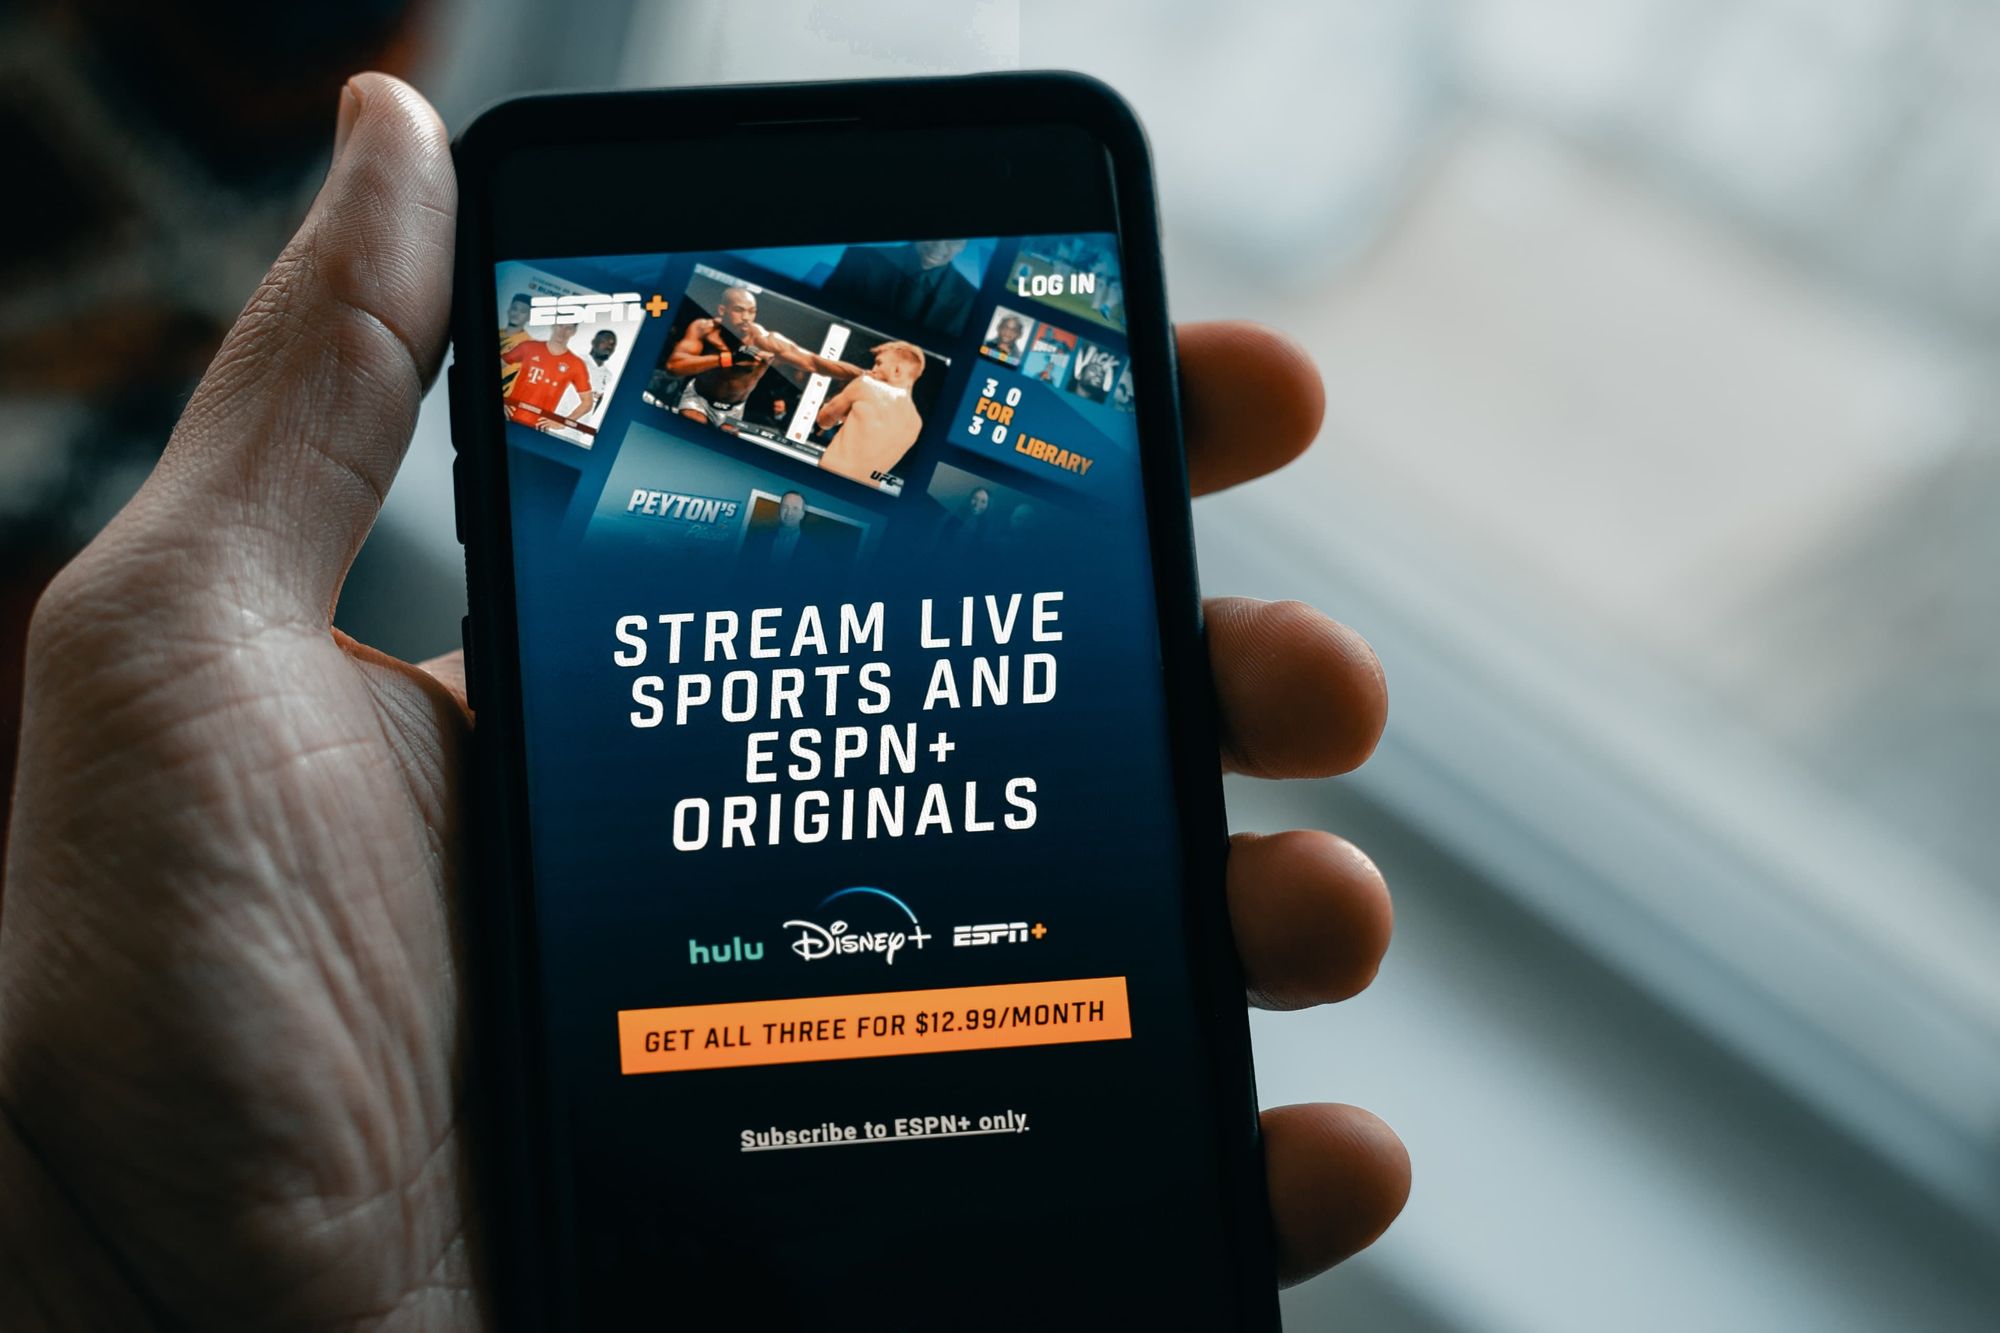 Entertainment in the Digital Age: Streaming, and Content Creation